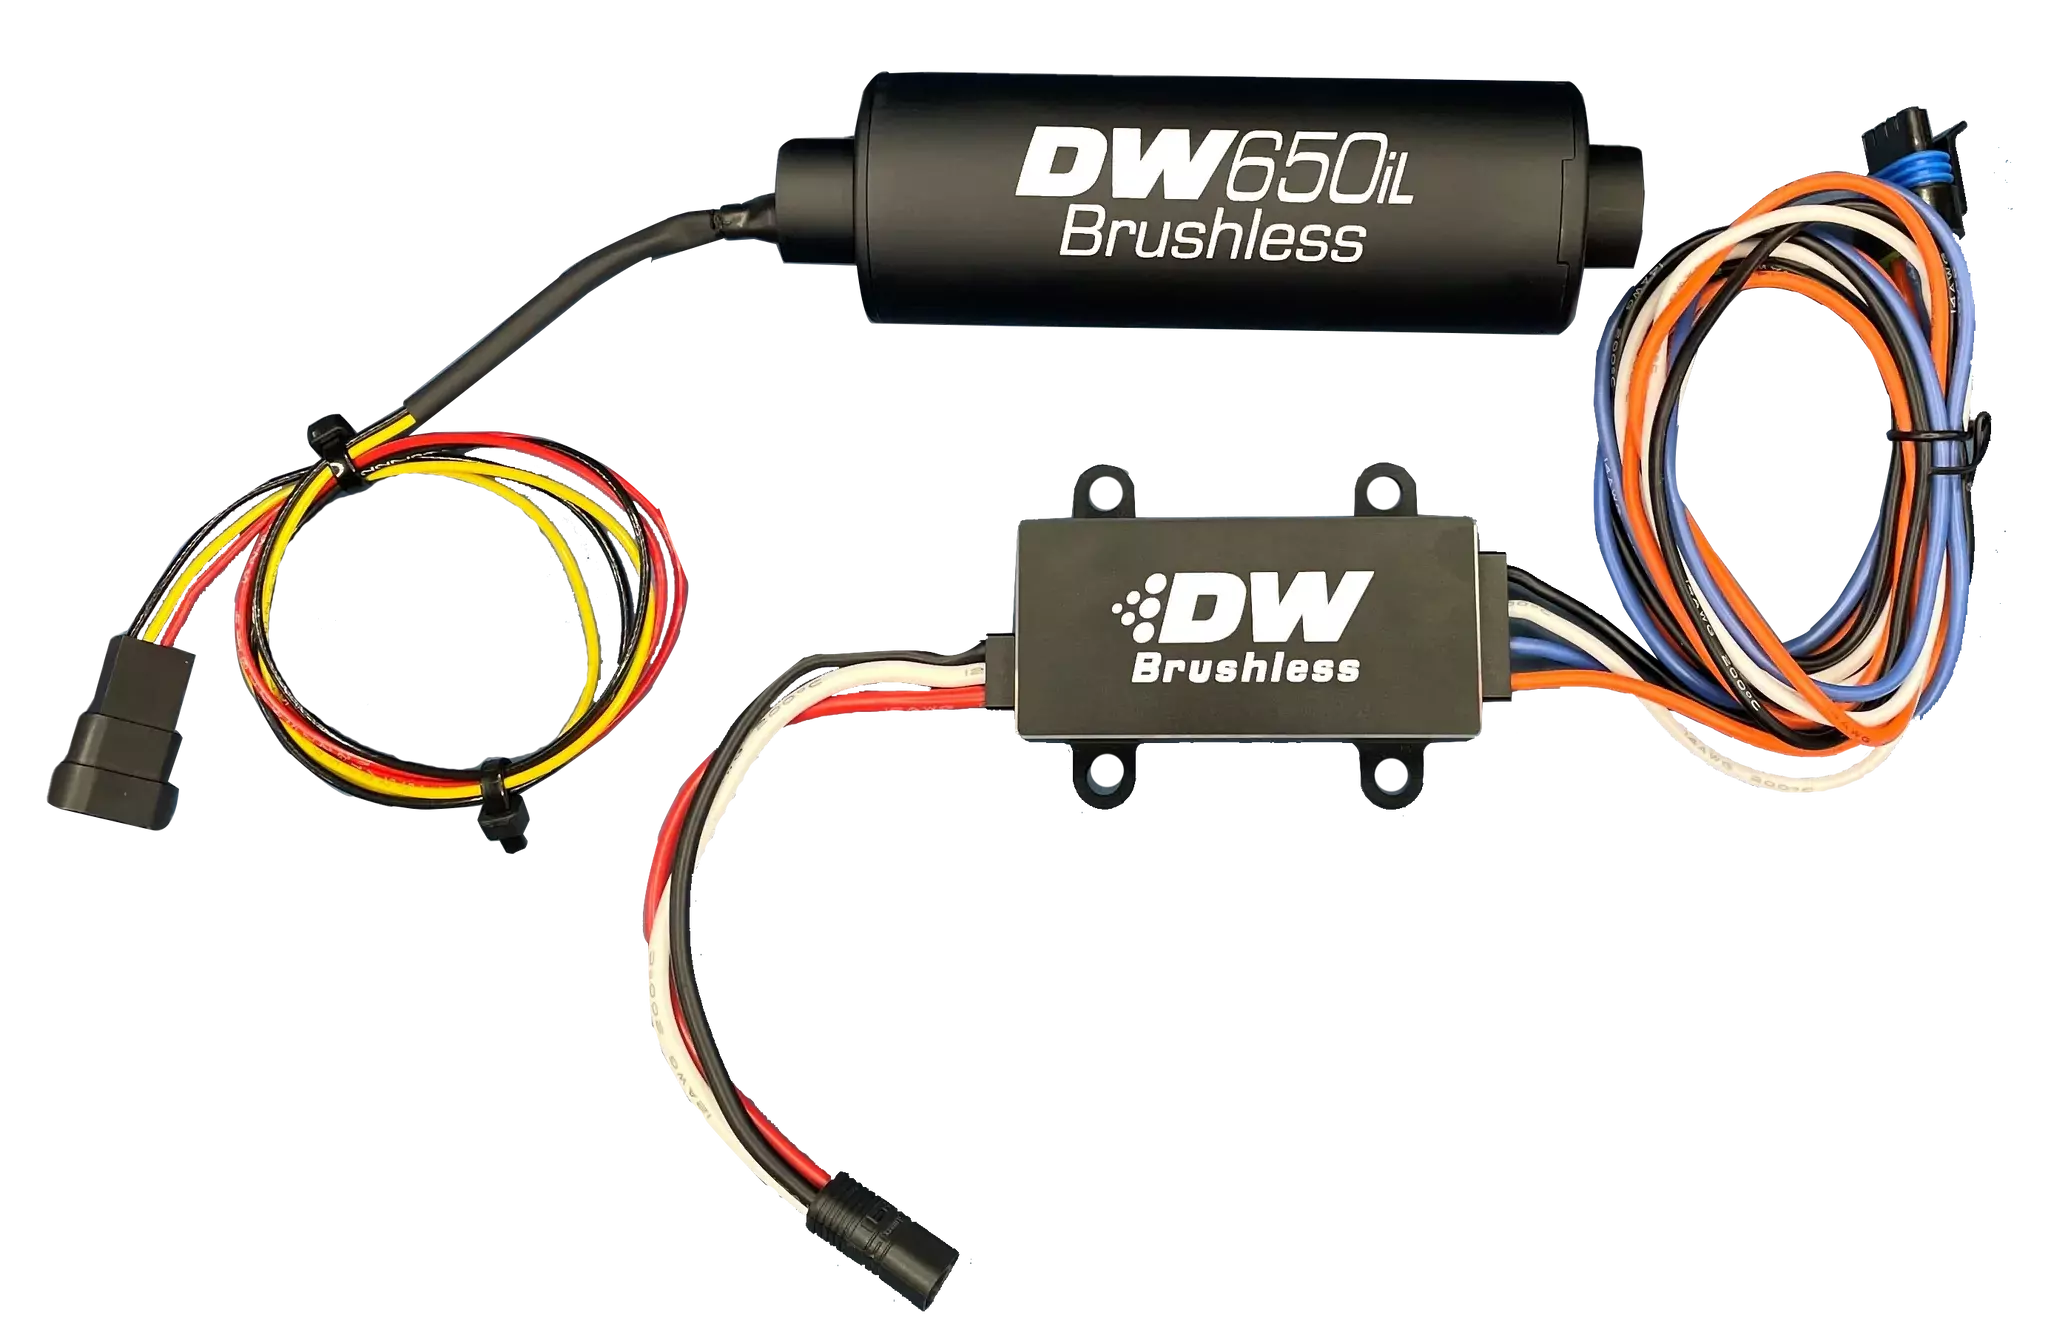 Deatschwerks 9-650-C105 Fuel Pump, DW650iL, Electric, In-Tank, Brushless, 650 lph, 40 psi, 8 AN Outlets, Install Kit, Gas / Methanol / E85, Single / Dual Speed Controller Included, Kit